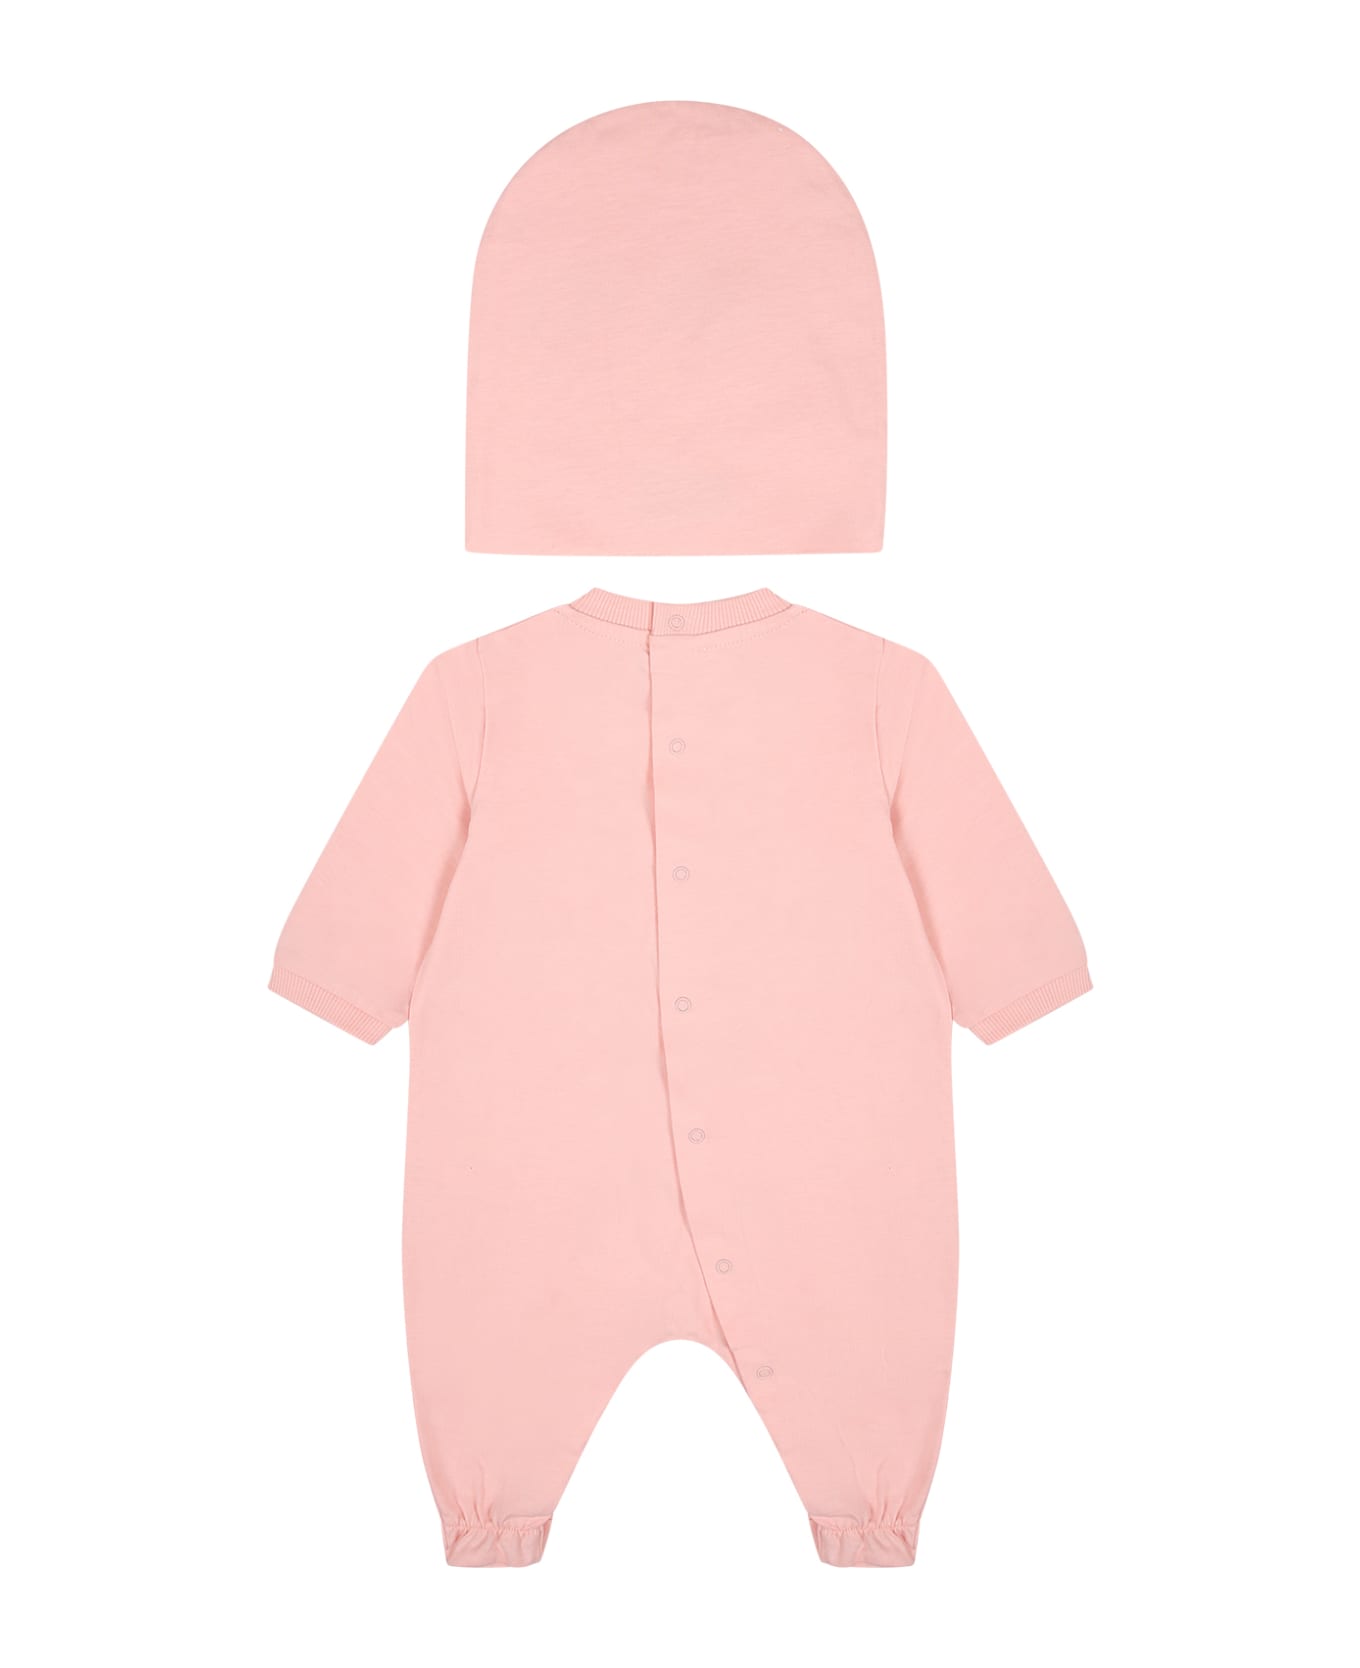 Moschino Pink Set For Baby Girl With Teddy Bear - Pink ボディスーツ＆セットアップ